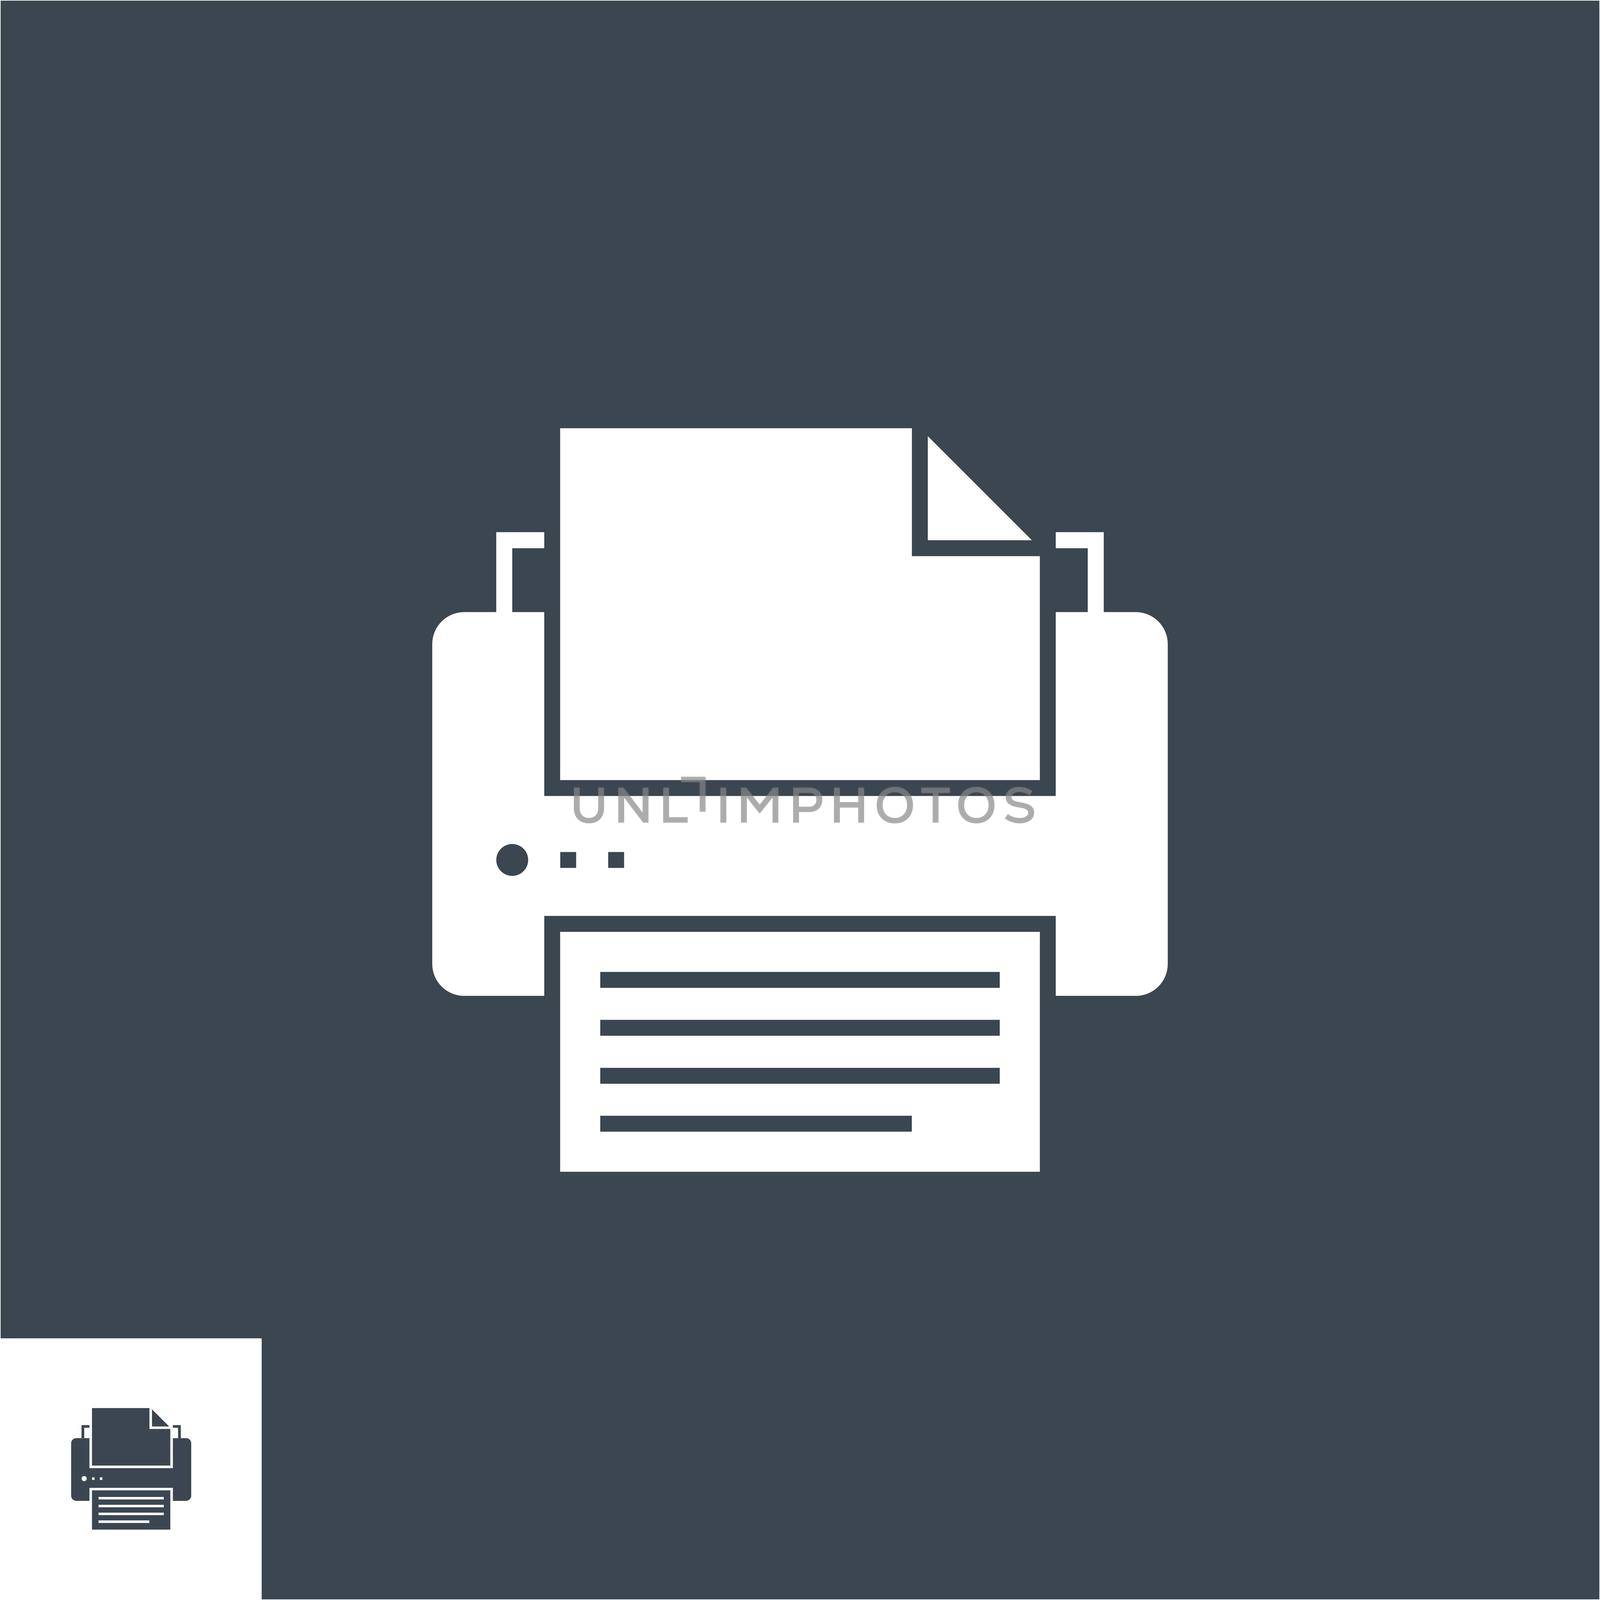 Printer related vector glyph icon. Isolated on black background. Vector illustration.